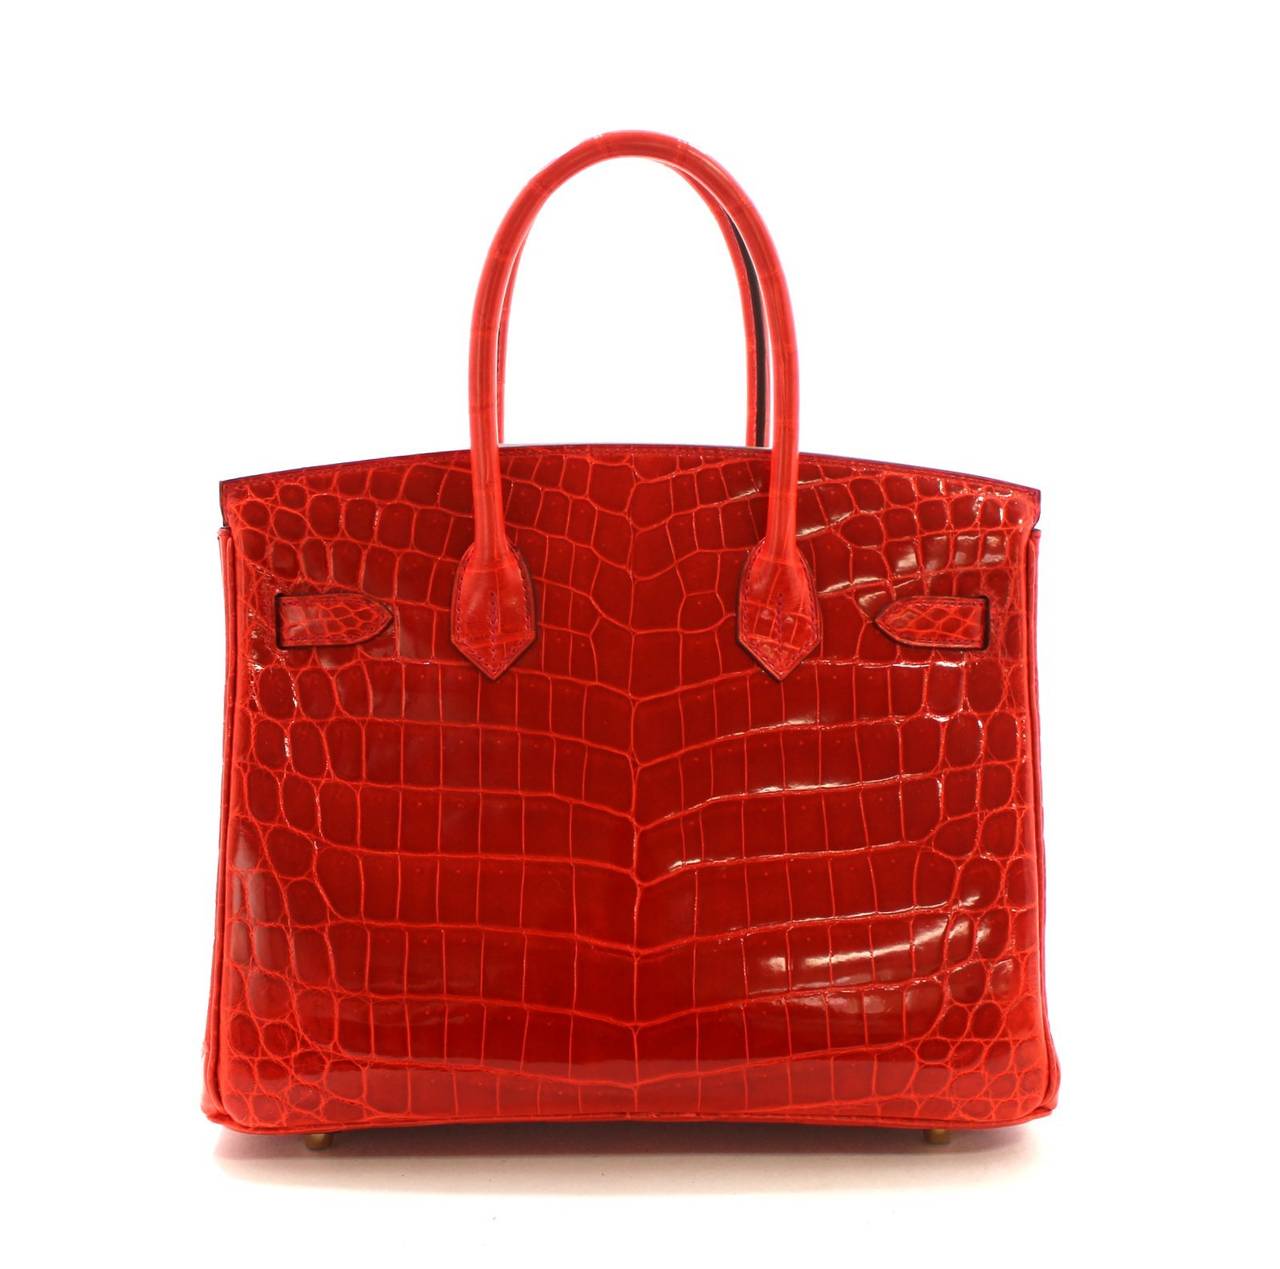 Pristine, store fresh condition (plastic on hardware) Hermès Birkin Bag in Geranium Nilo Crocodile with gold, 30 cm size.  
 Crafted by hand and considered by many as the epitome of luxury items, Birkins are extremely difficult to get. Exotic